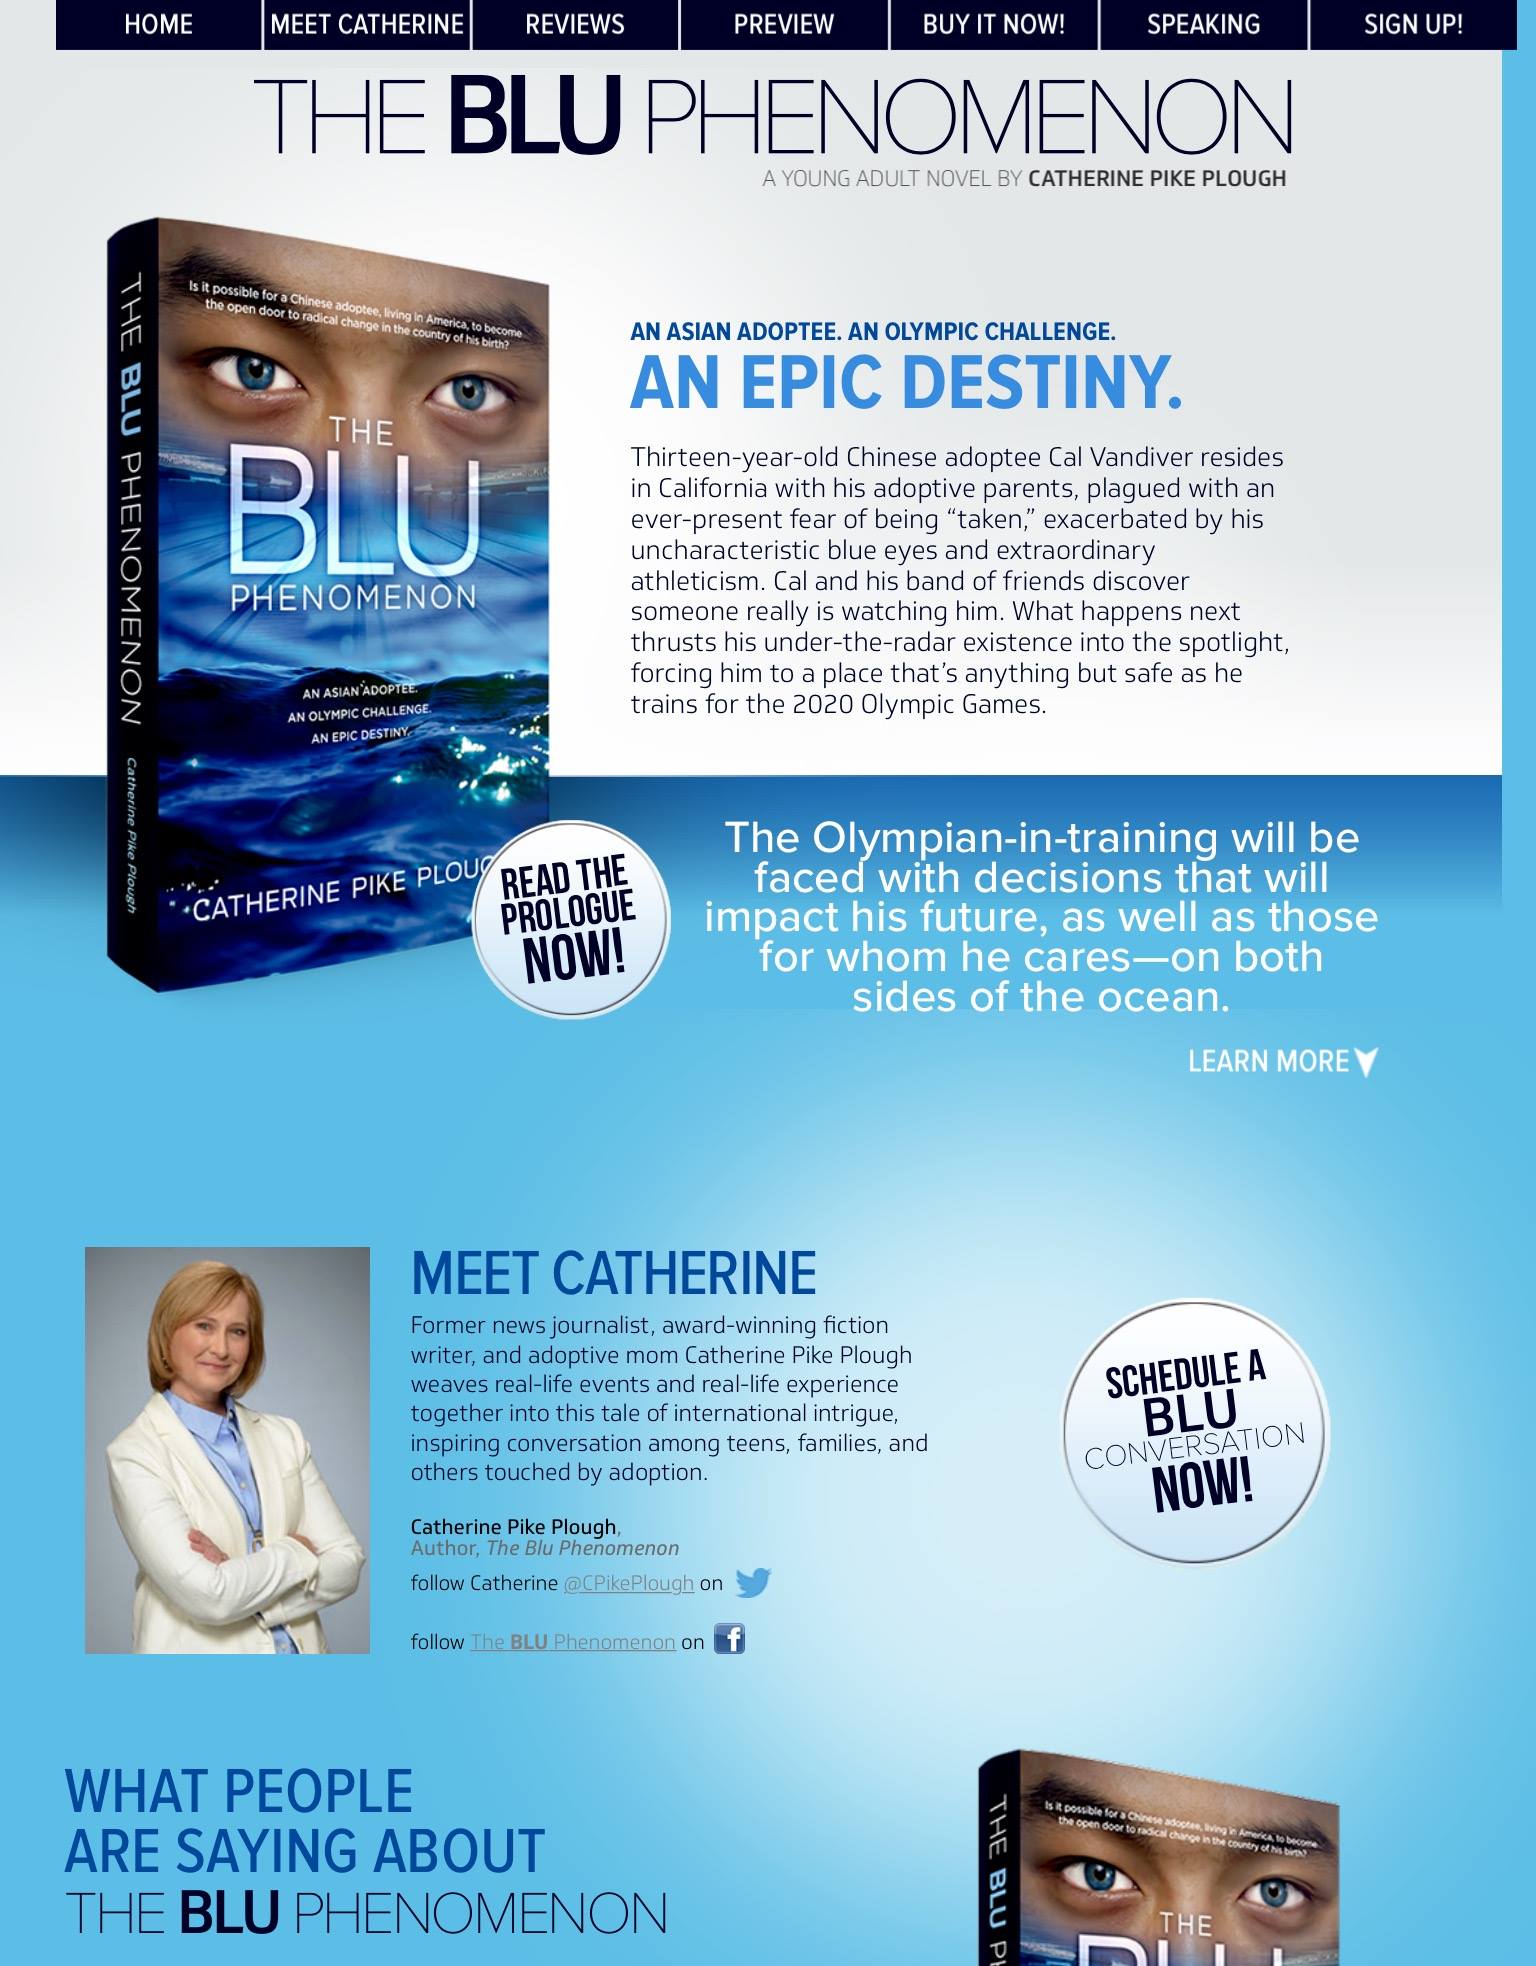 The Blu Phenomenom is a new young adult fiction novel just released by Catherine Pike Plough